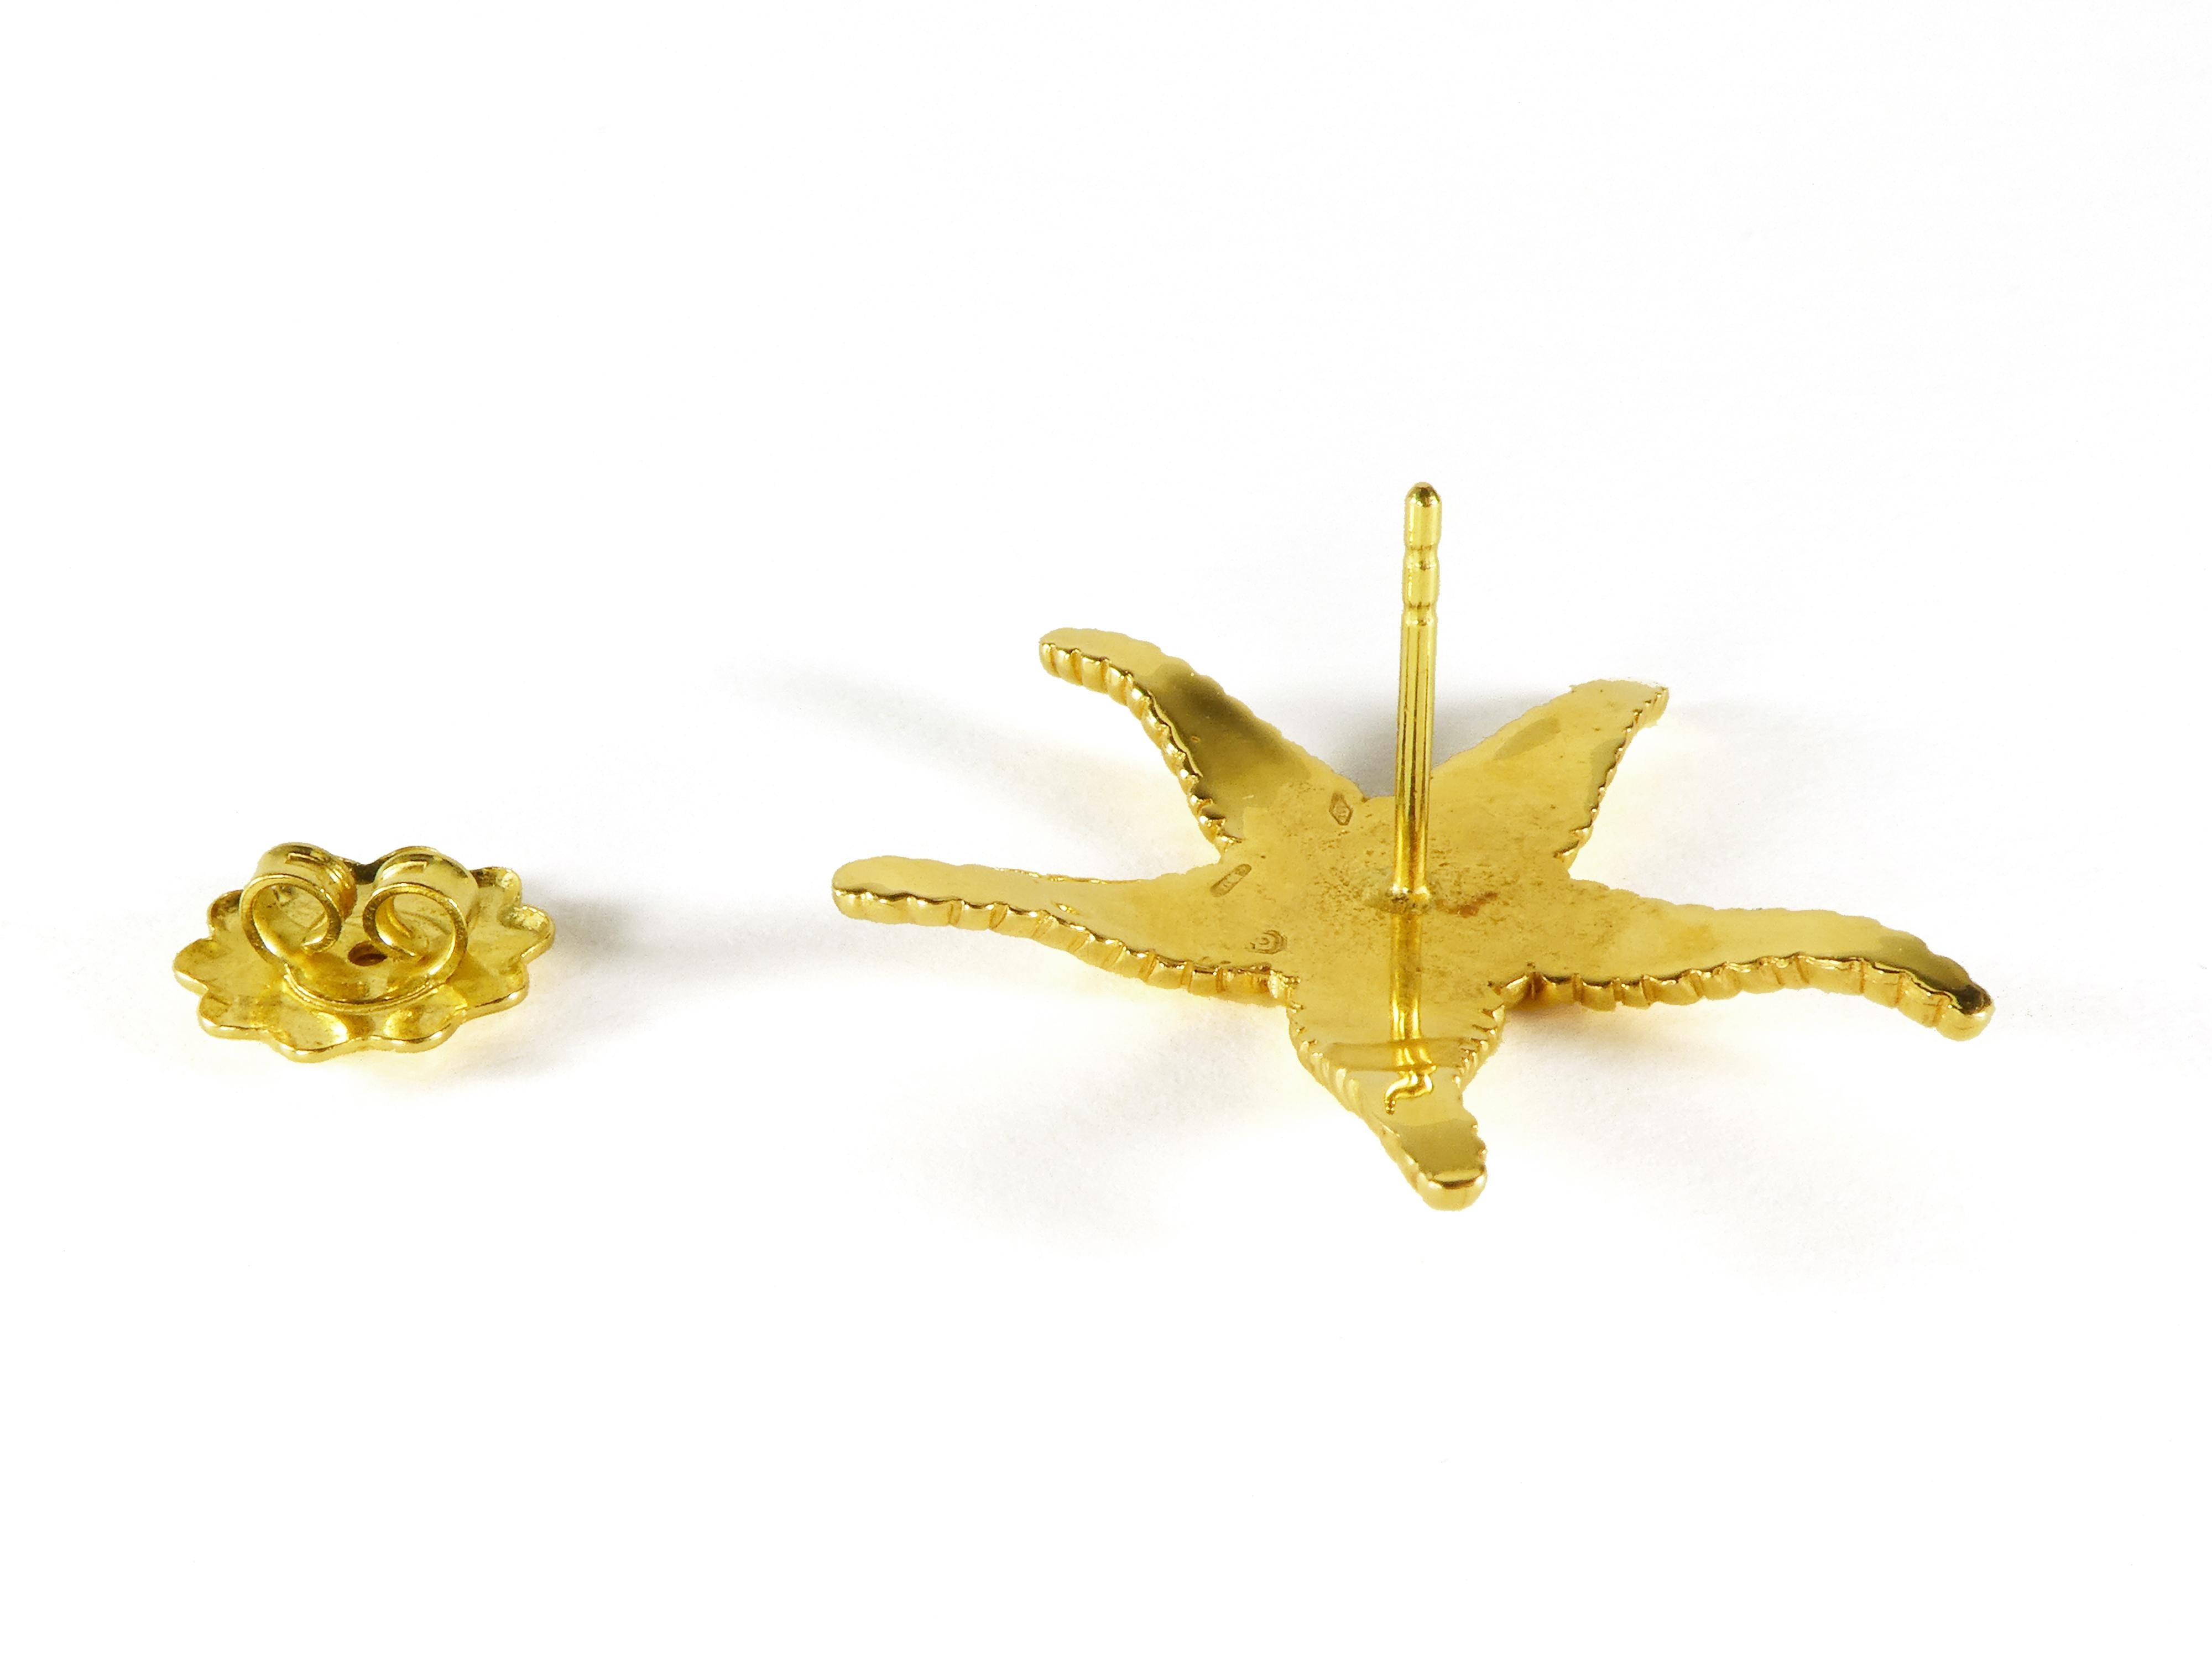  Very fine earrings handcrafted in Italy. Made in 18 Kt yellow gold weighing in total gr 12.55 

These earrings are new and they are delivered from our shop with box and certificate.
Butterfly backing 
Measures cm 3.10 x 3.10
